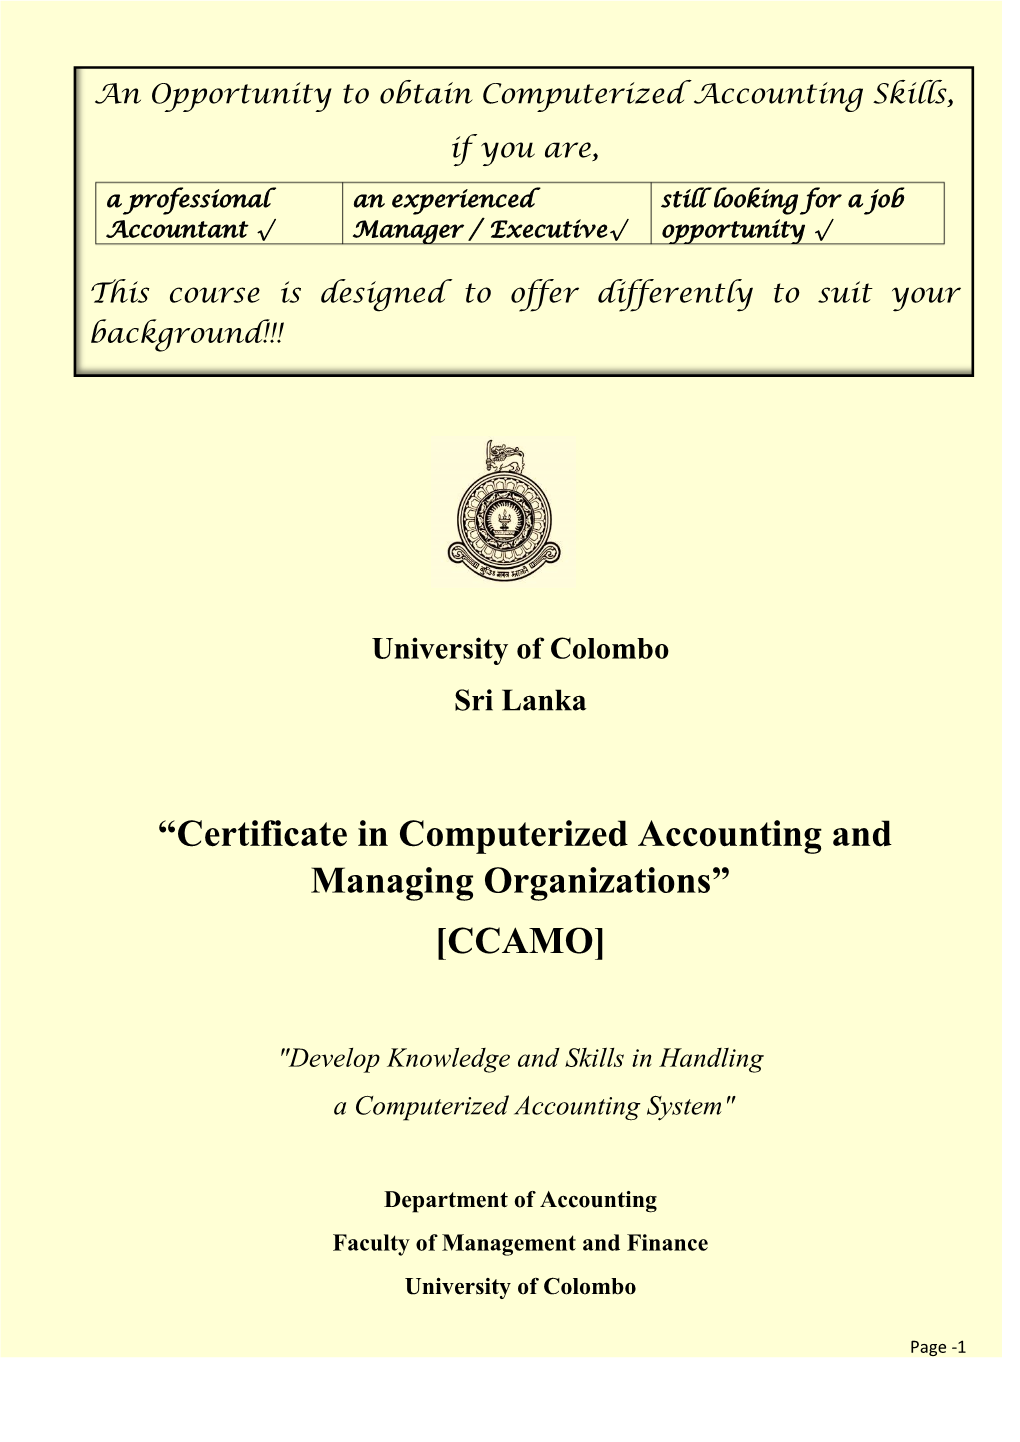 “Certificate in Computerized Accounting and Managing Organizations” [CCAMO]